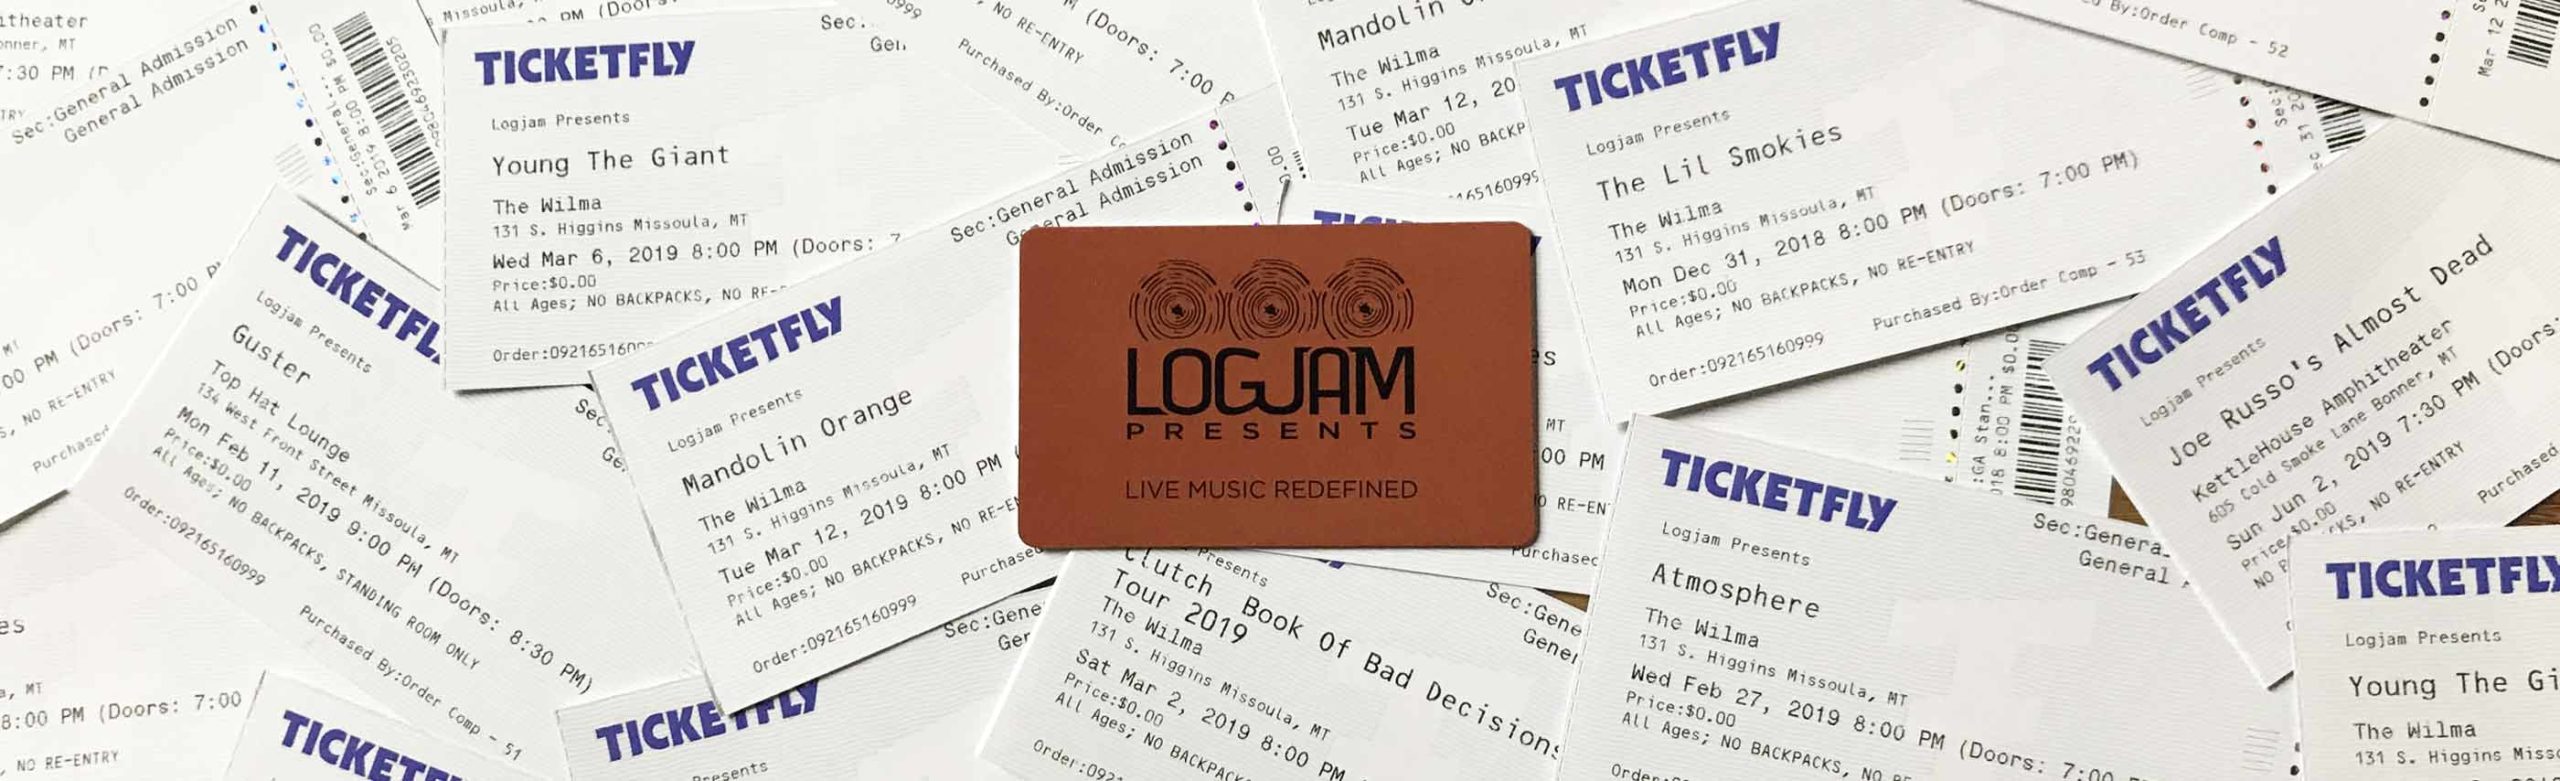 The Perfect Present: The Logjam Presents Gift Card Image